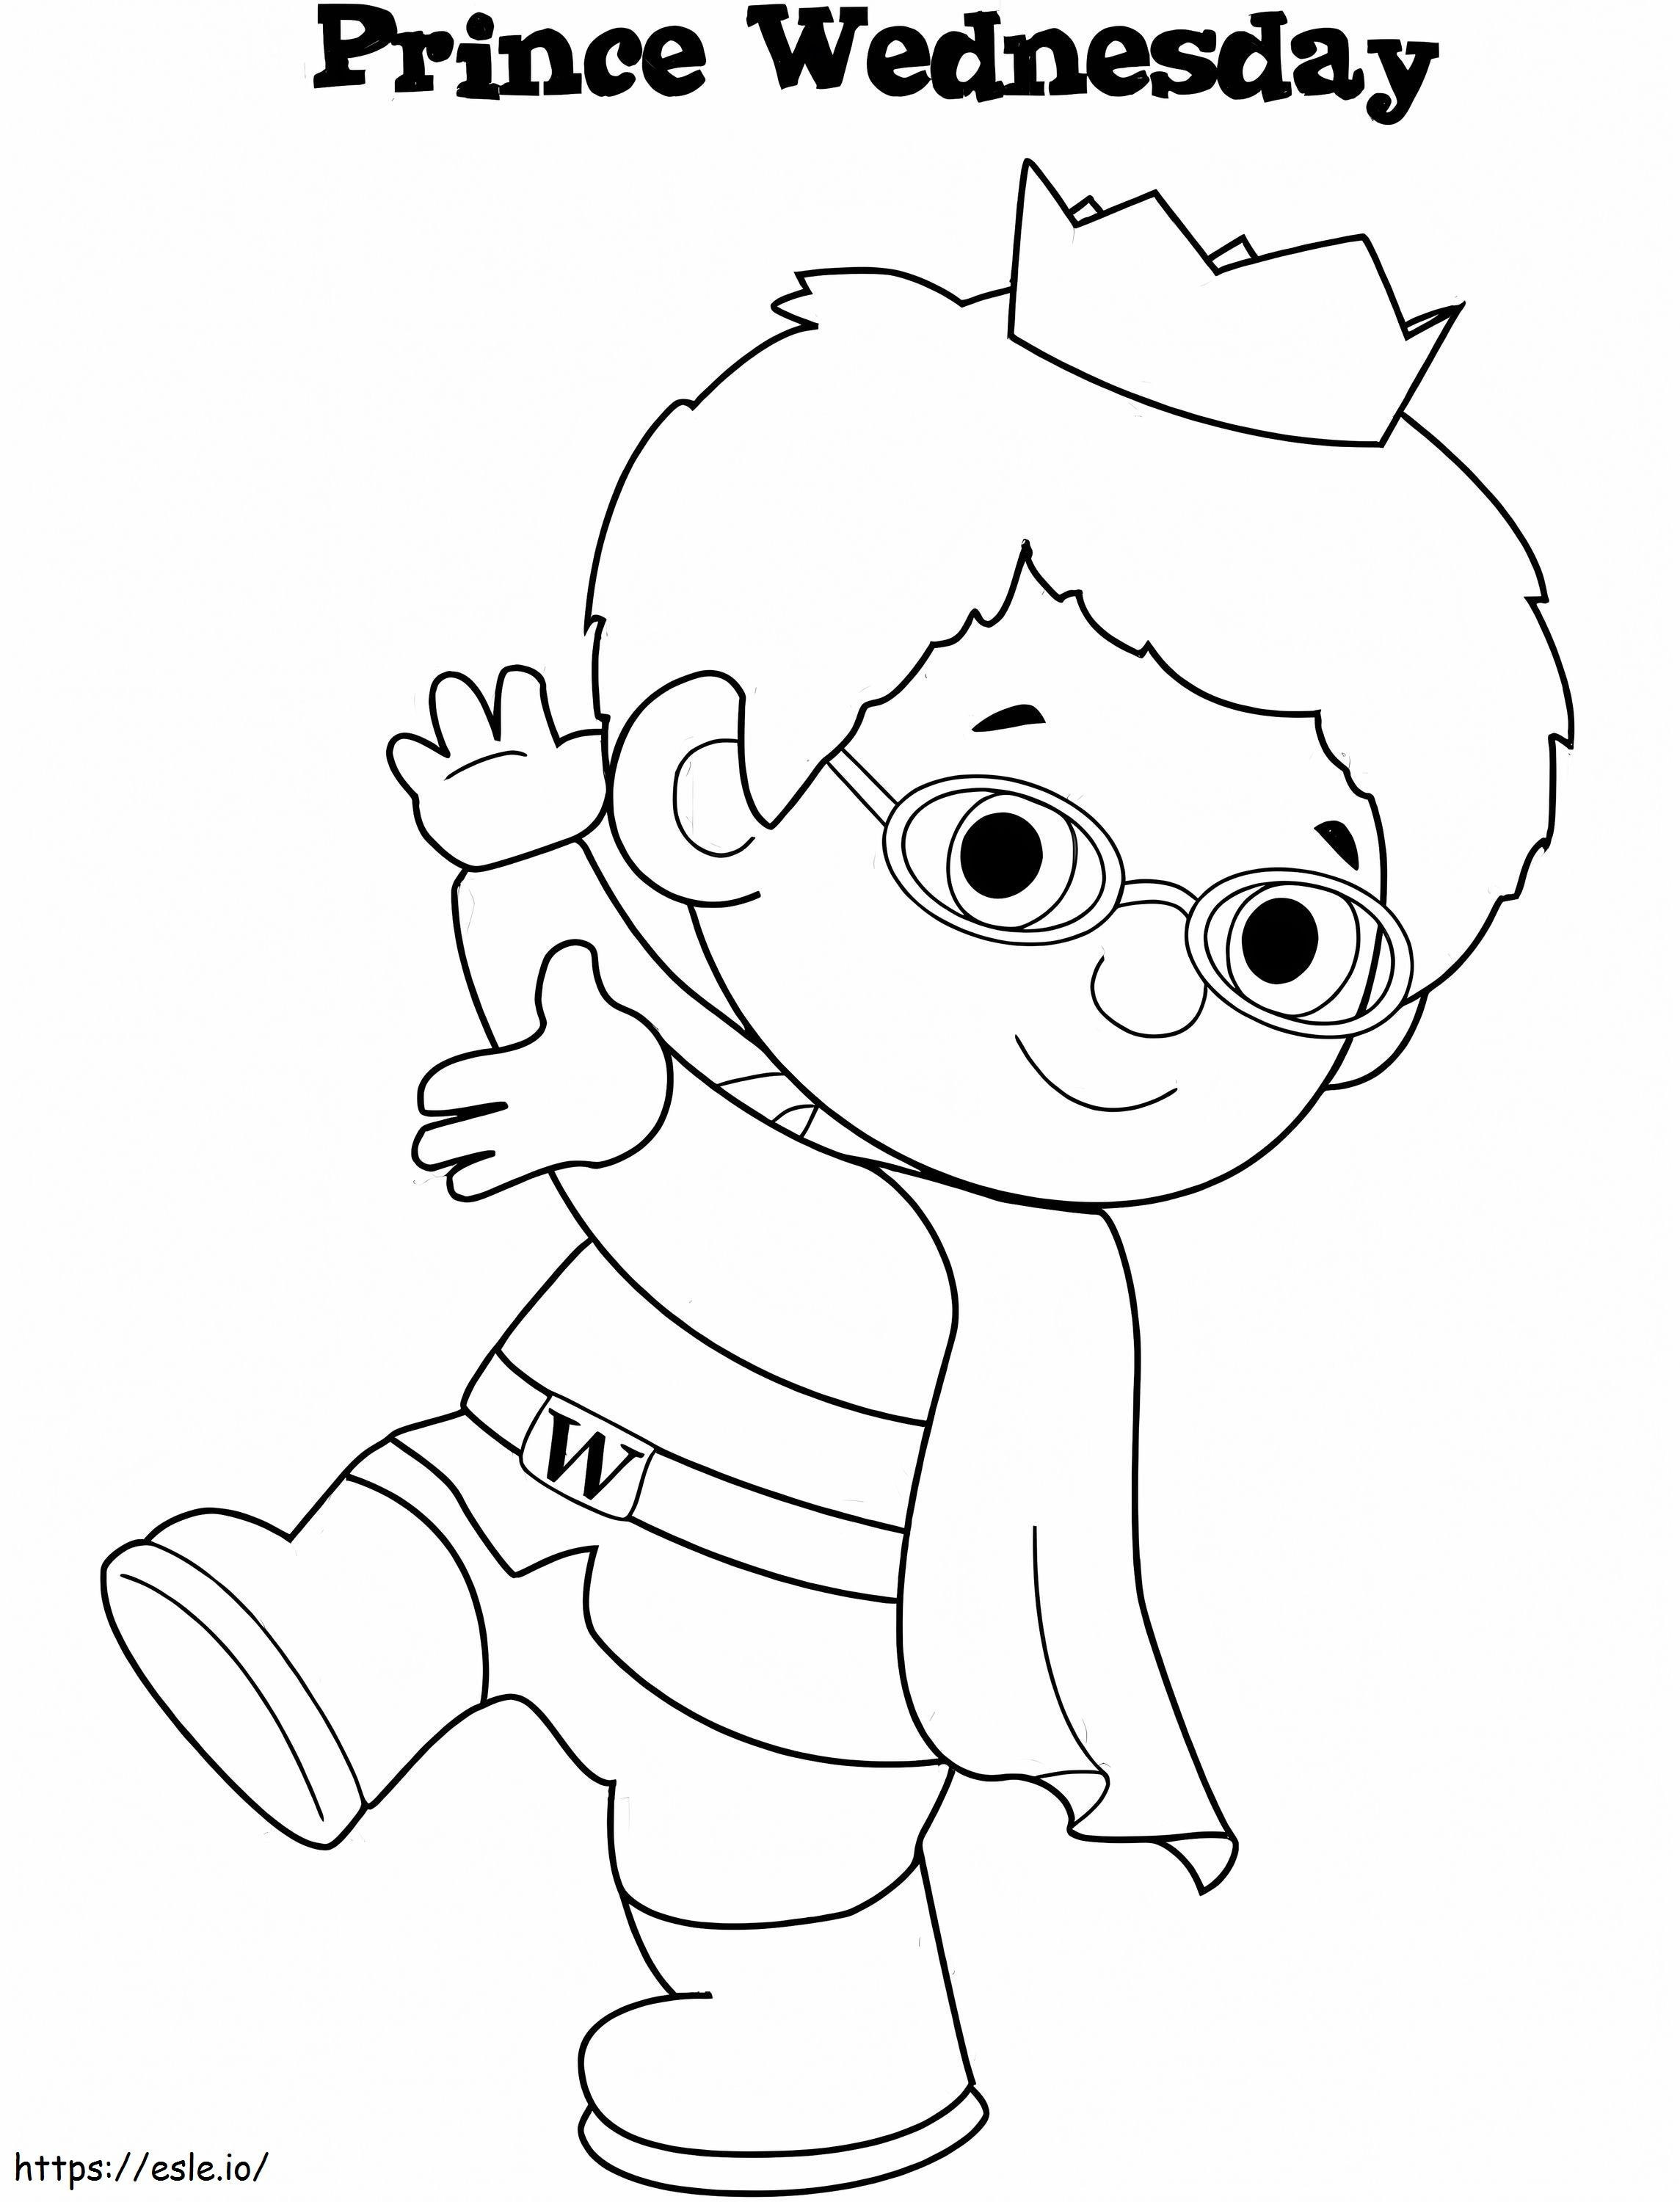 Prince Wednesday A4 coloring page